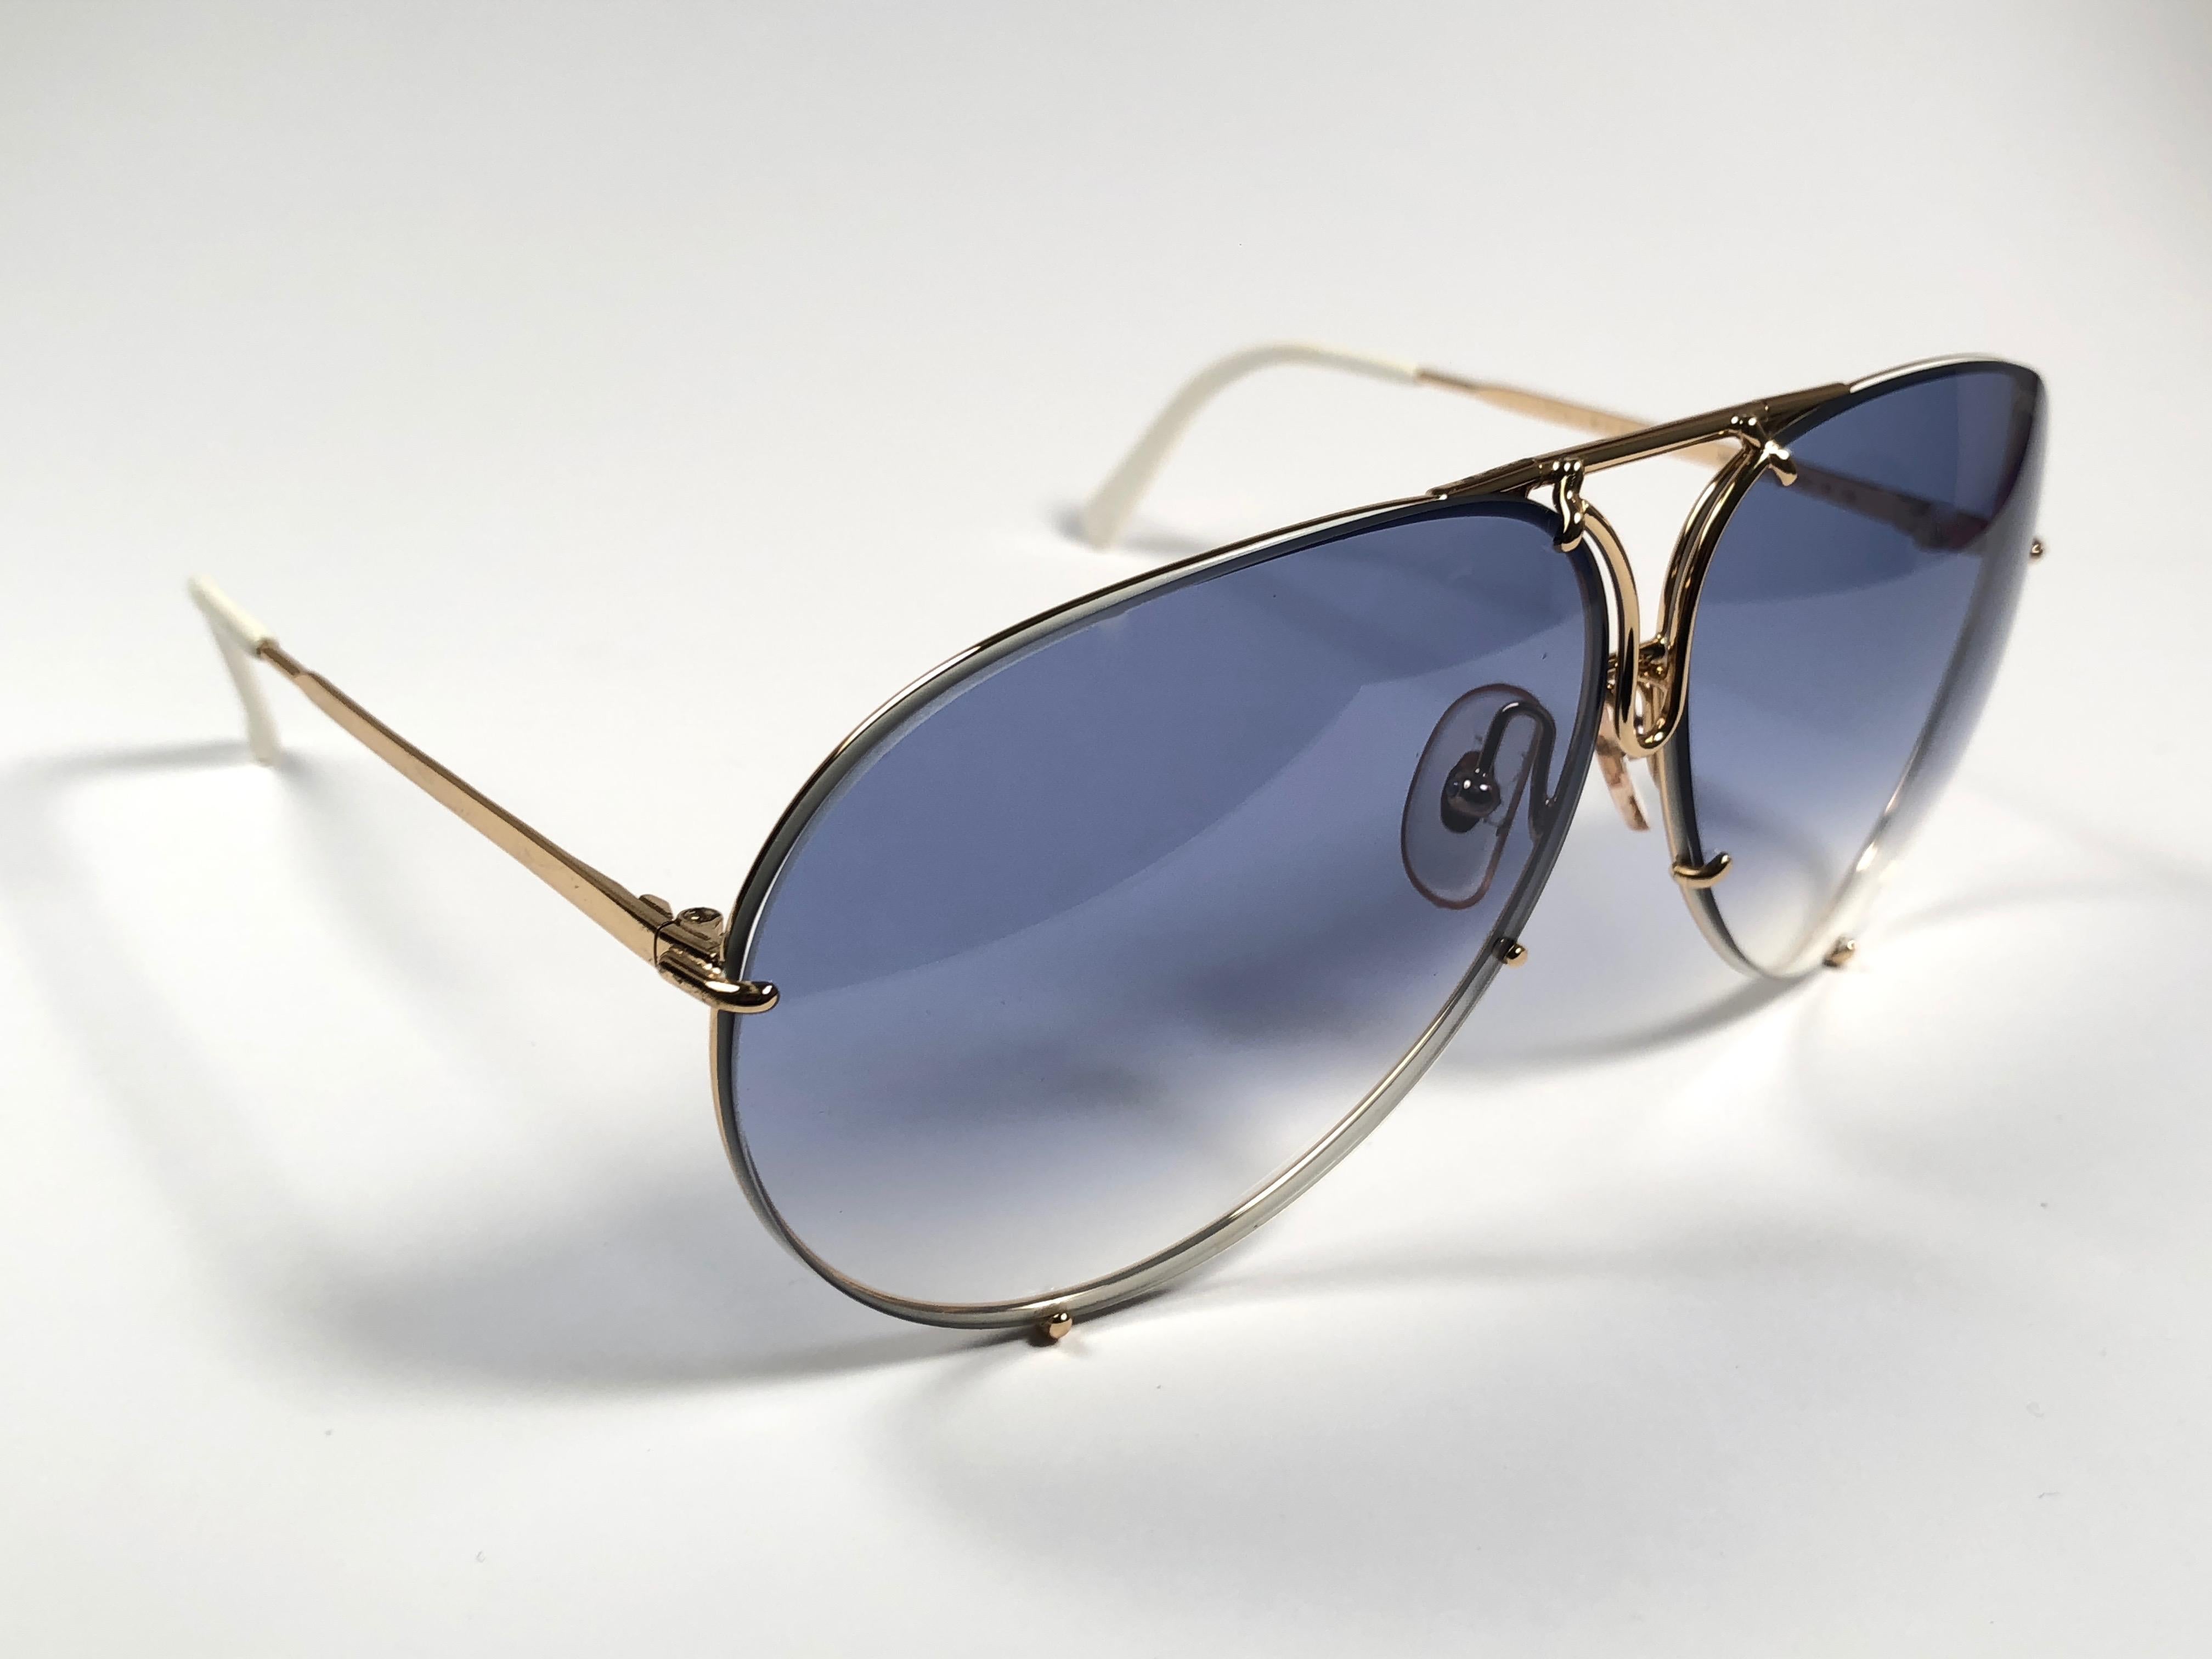 
New 1980's Porsche Design 5621 white and gold frame with blue gradient lenses. Amazing craftsmanship and quality. 
Comes with the original black Porsche hard case thats has some wear on it due to nearly 40 years of storage. There is no extra set of